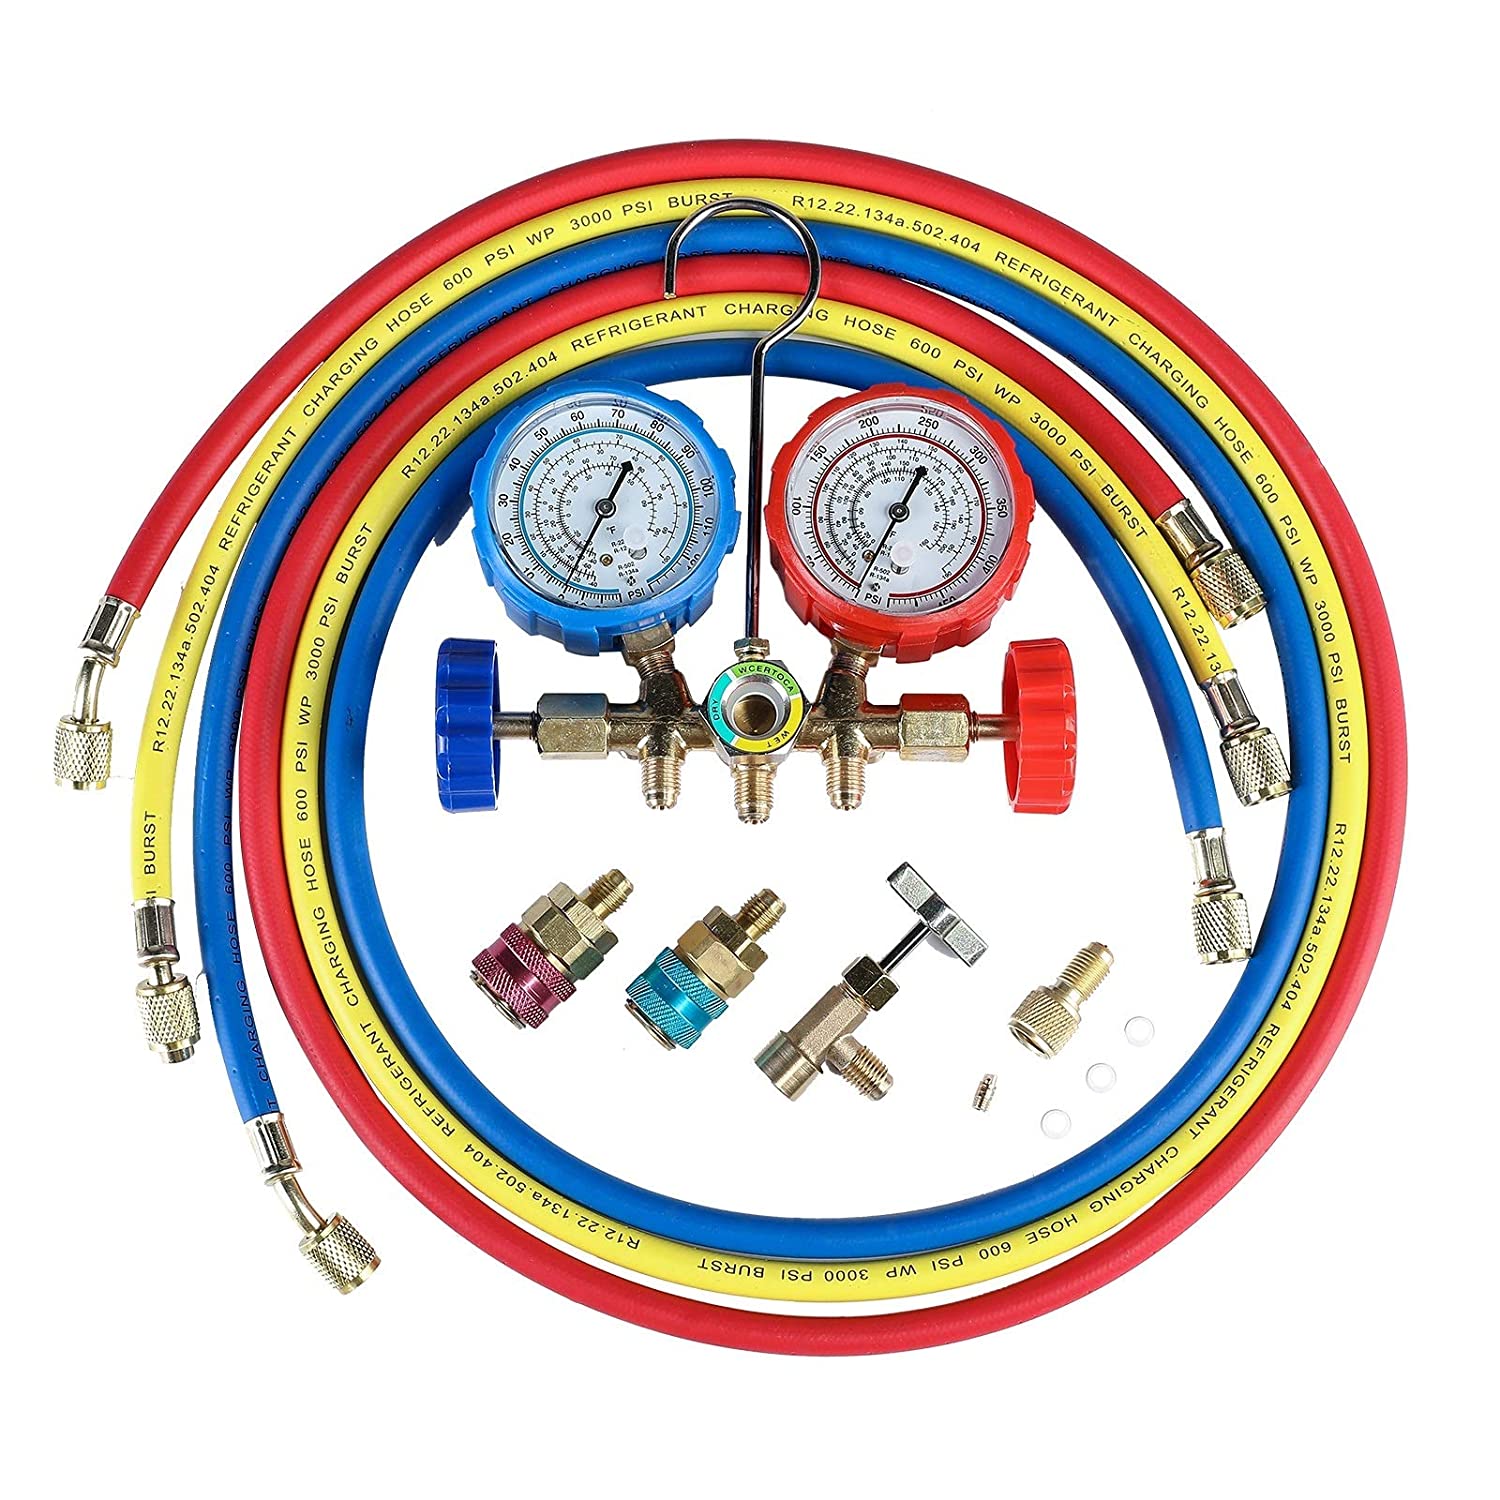 5FT 3-Way AC Diagnostic Manifold Gauge Set for Freon Charging, Fits R134A R12 R22 and R502 Refrigerants, with Acme Adapter and Can Tap for Automotive Car Air Conditioning